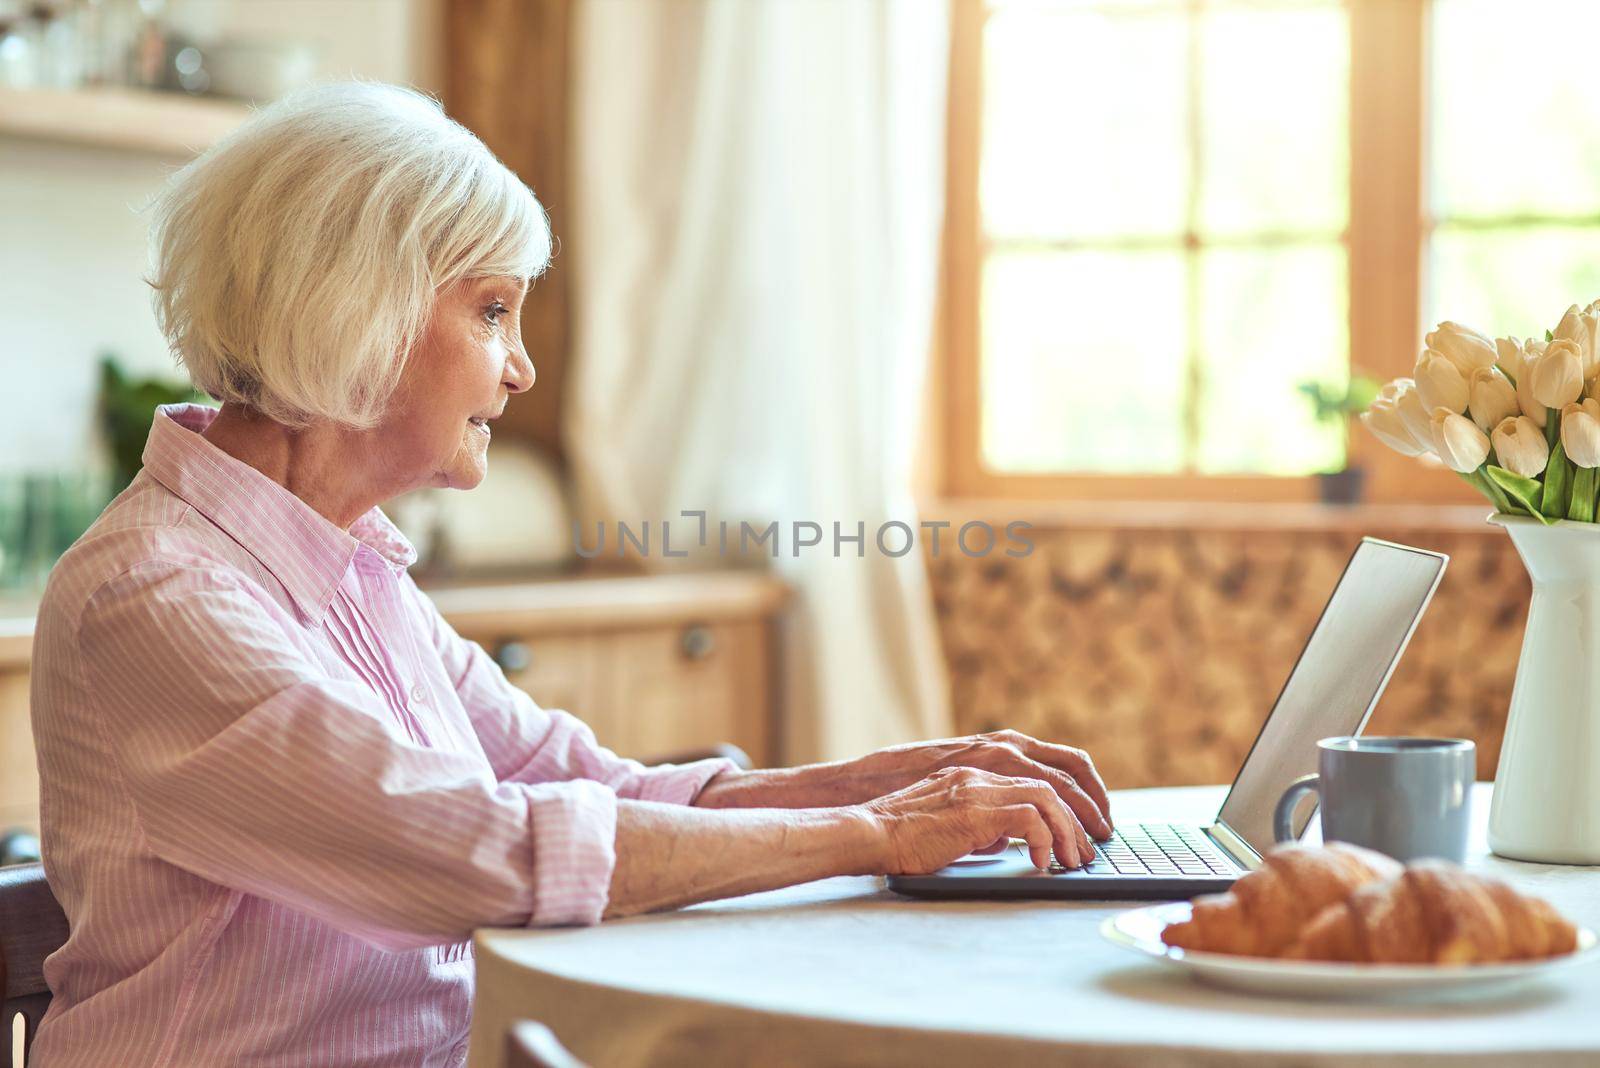 Elder lady using a laptop computer at home by friendsstock